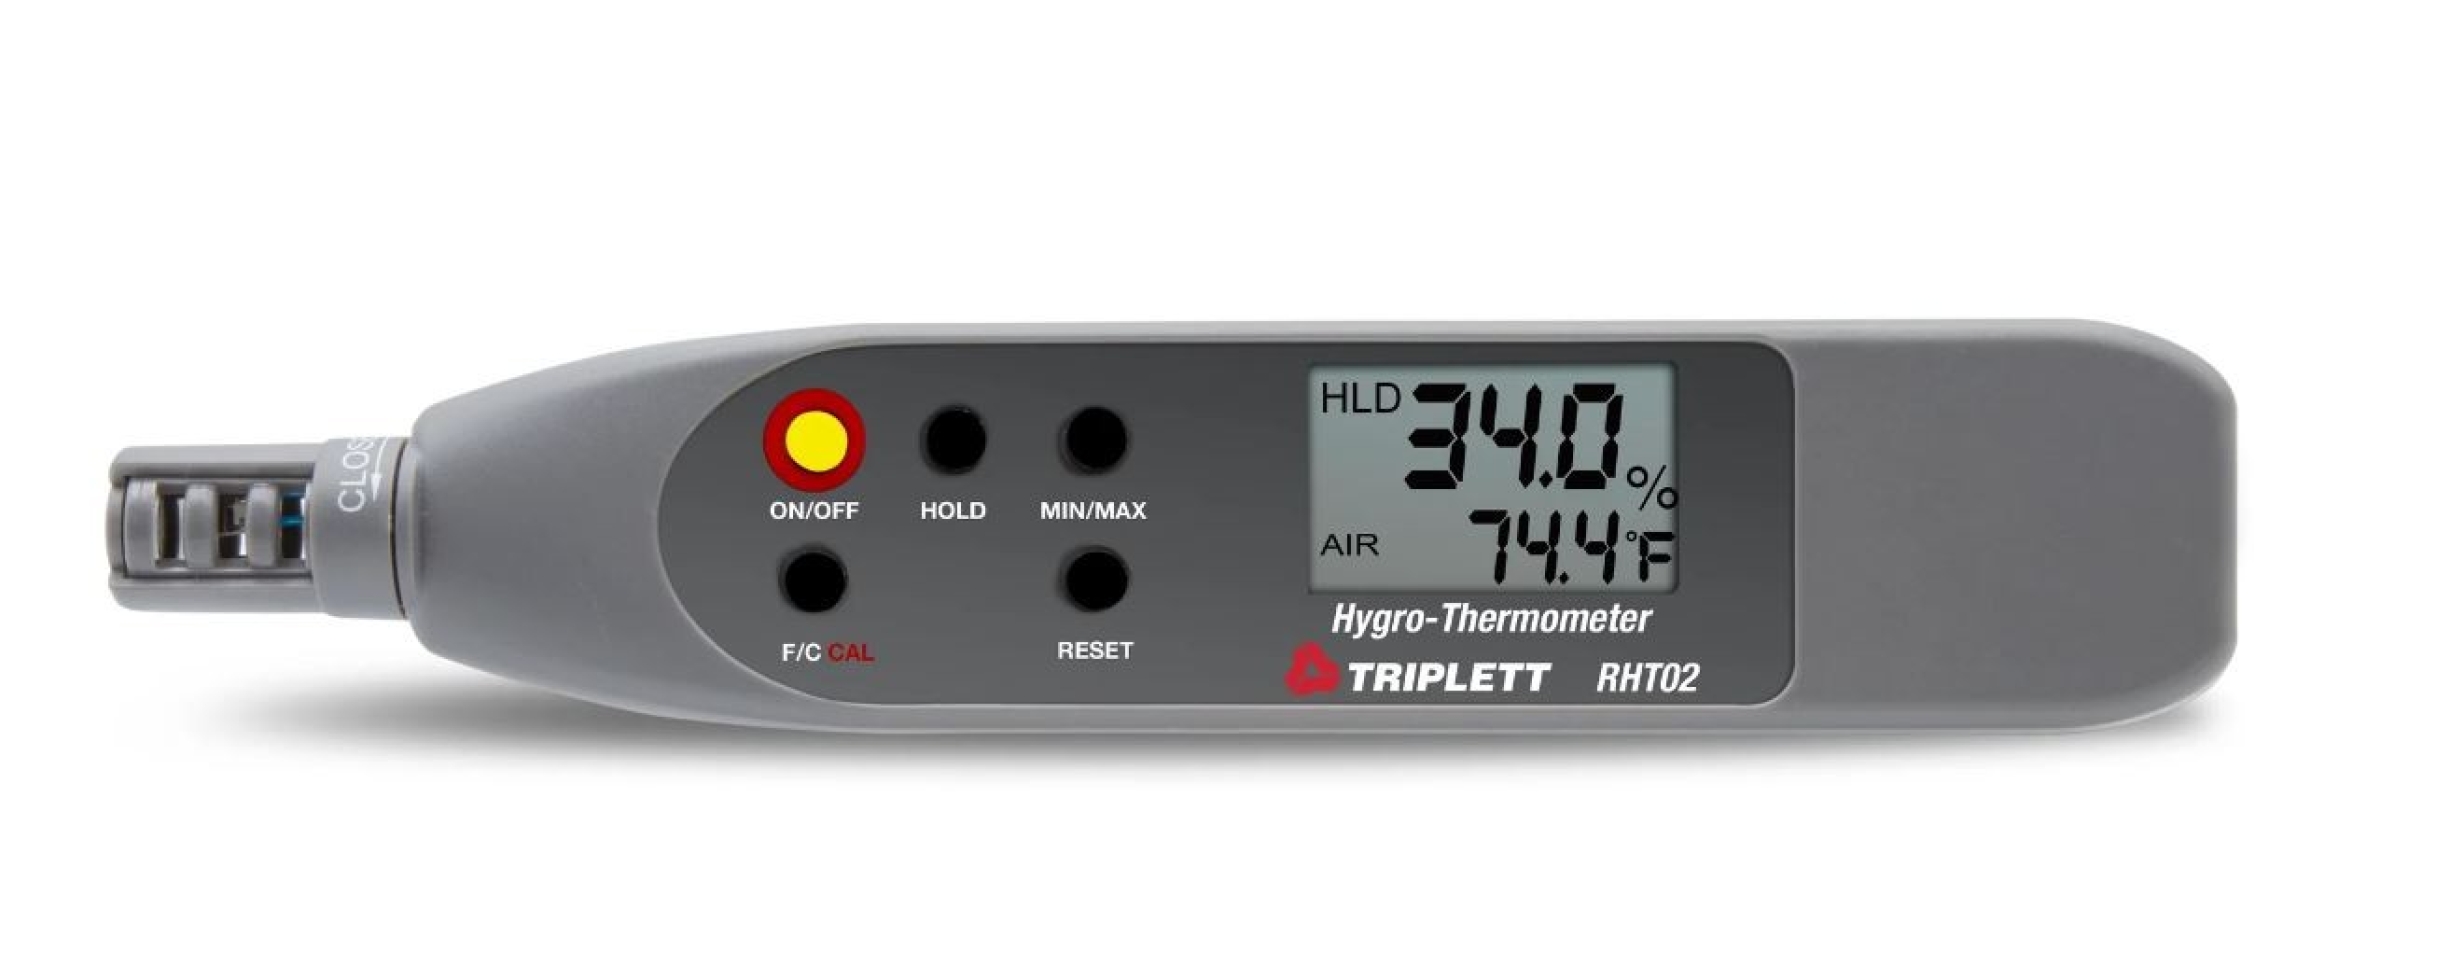 HYGRO-THERMOMETER PEN - DISPLAYS HUMIDITY AND AIR TEMPERATURE - (RHT02)